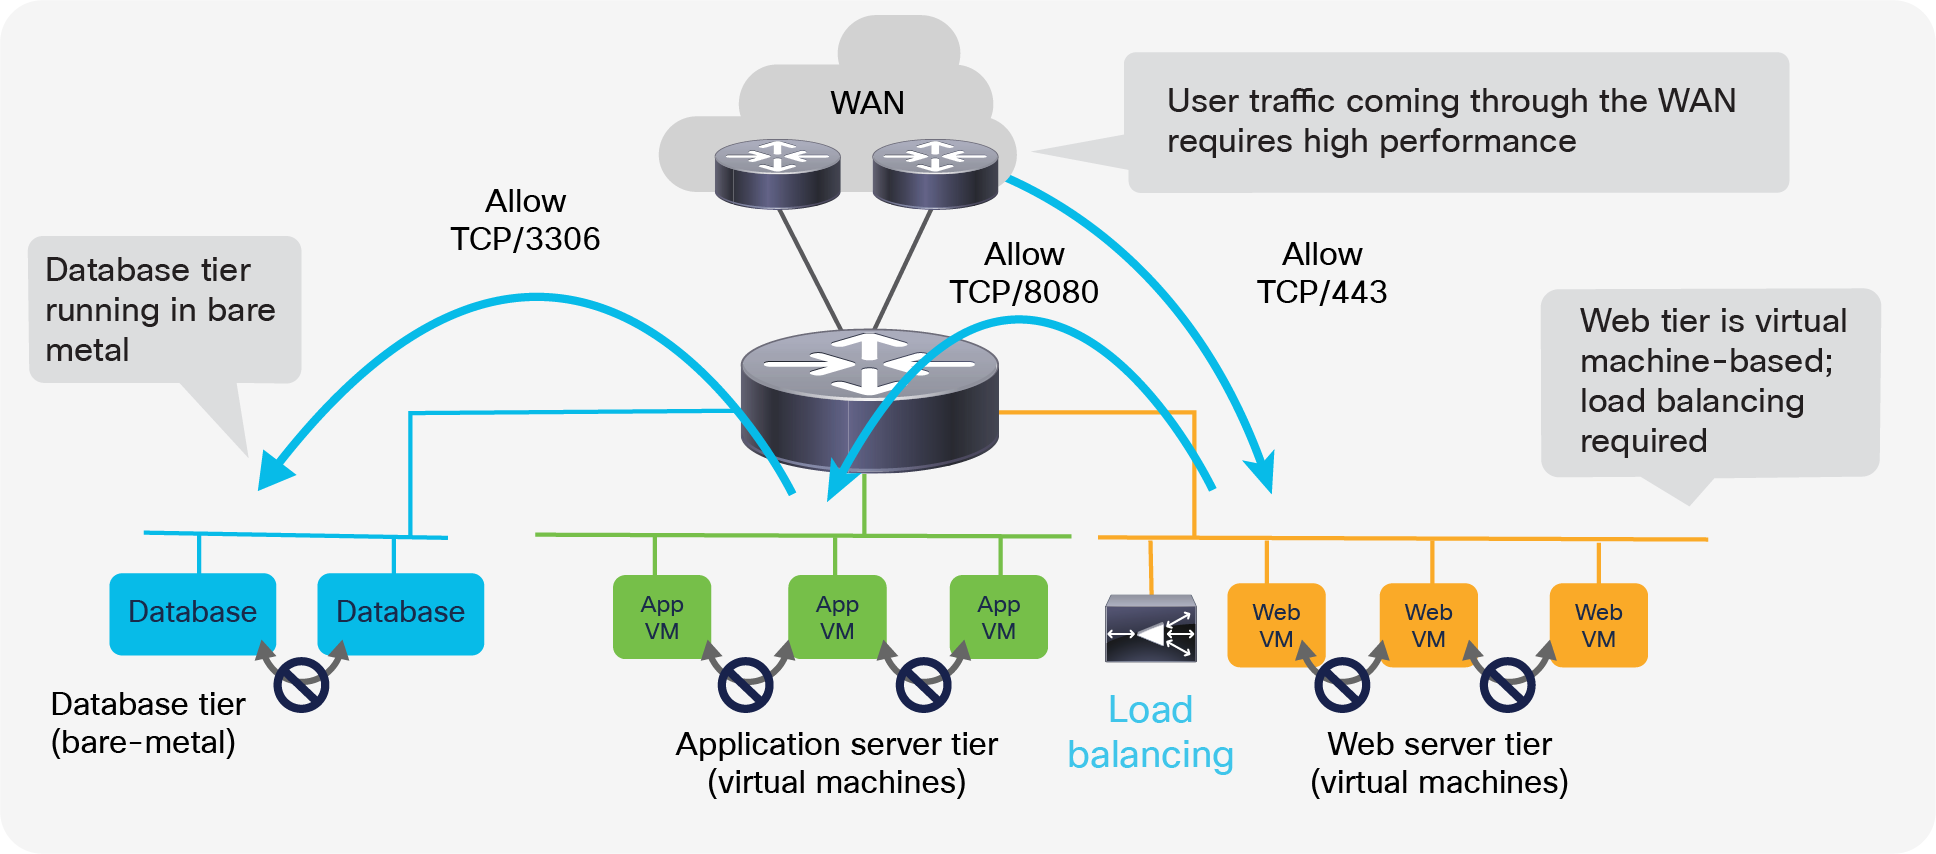 A typical three-tier application with a nonvirtualized database